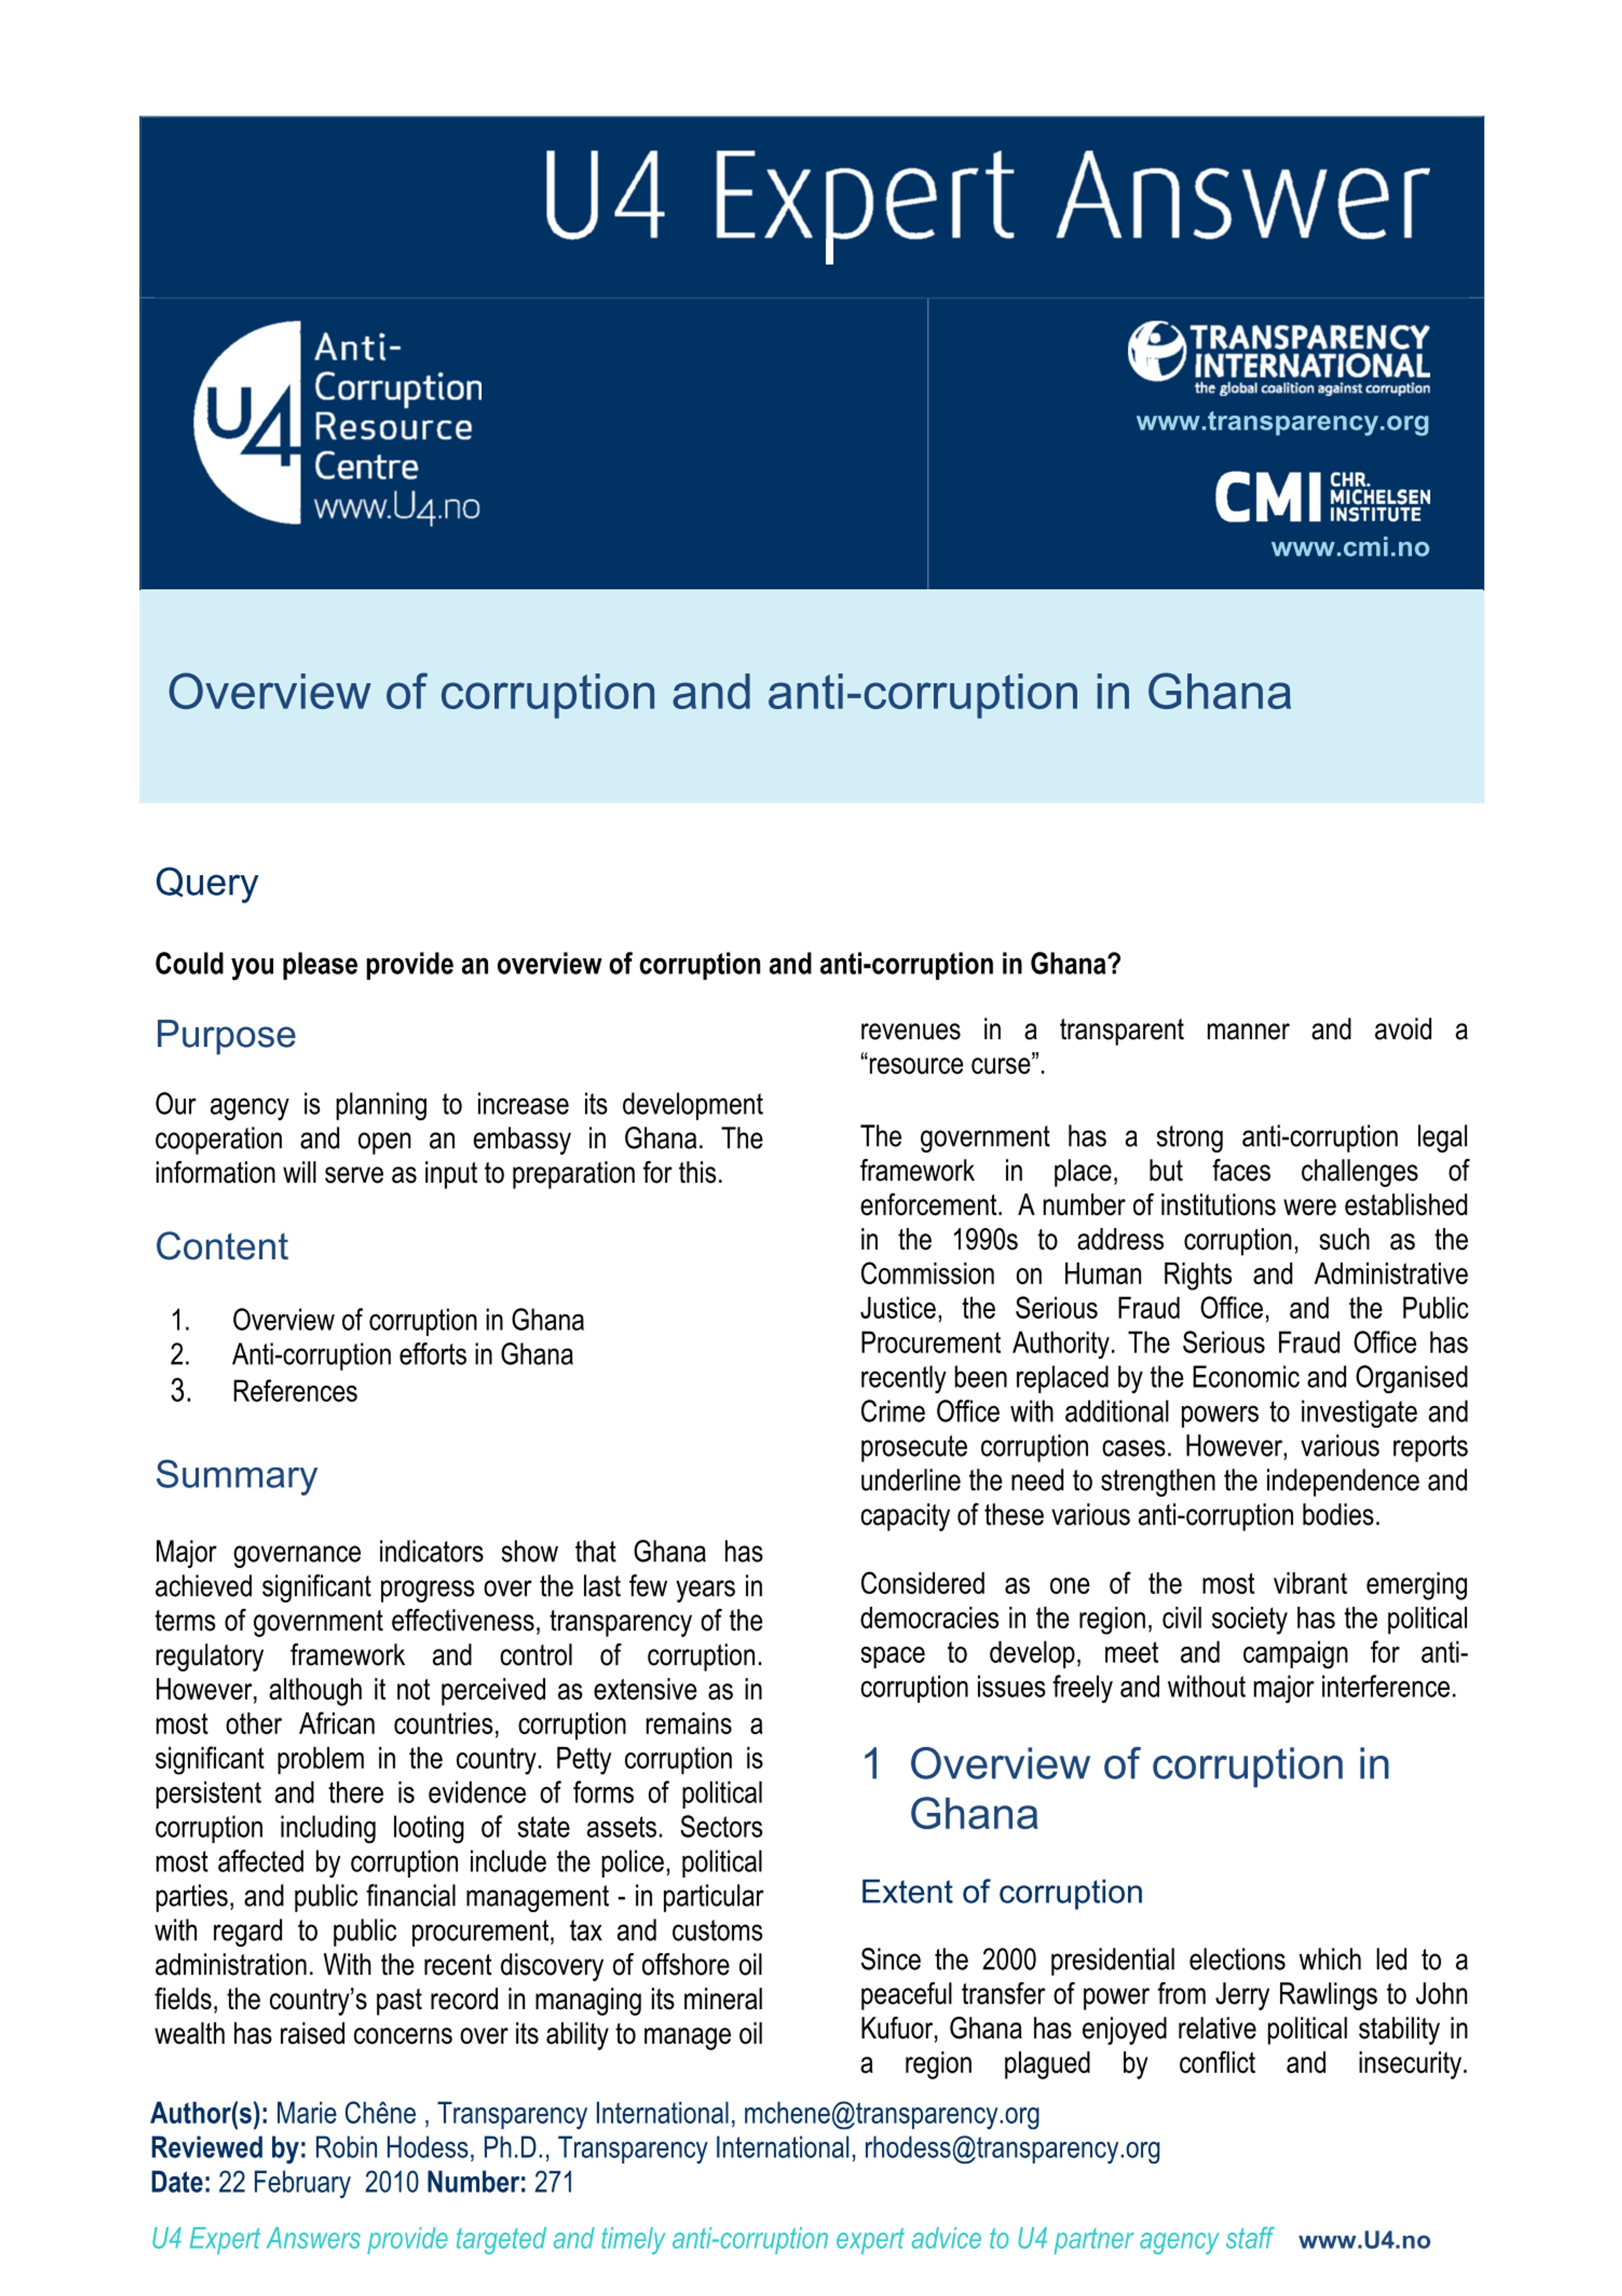 Overview of corruption and anti-corruption in Ghana